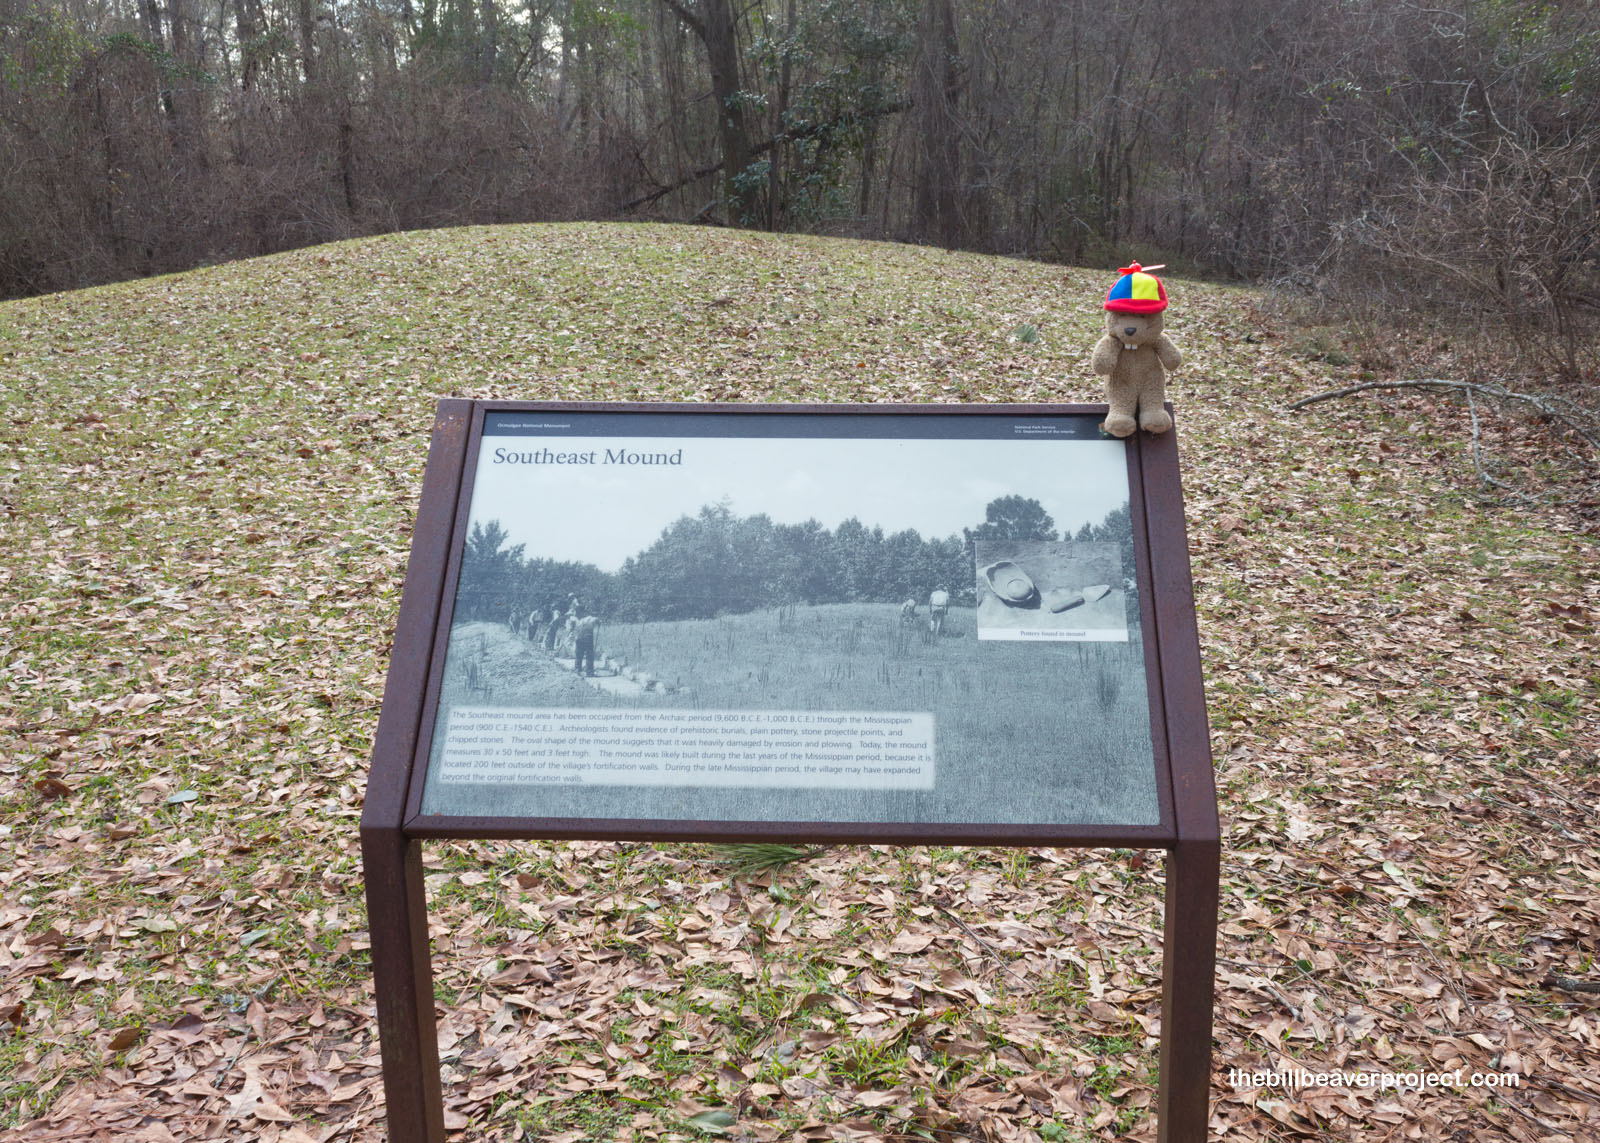 The mysterious Southeast Mound!